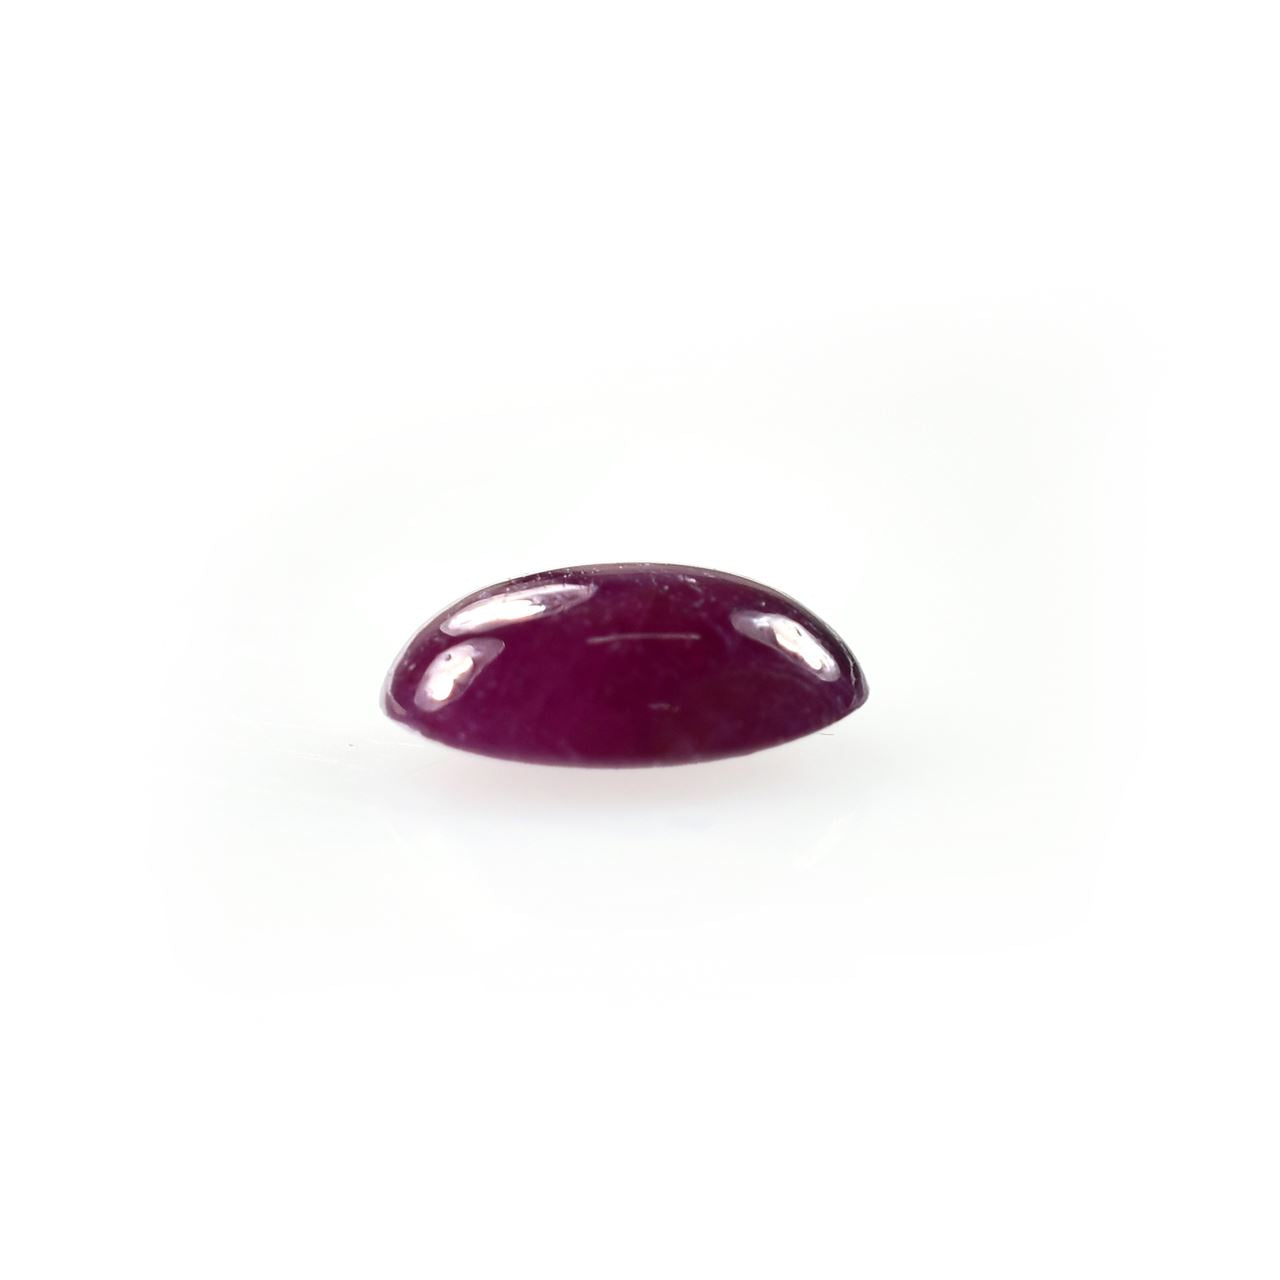 RUBY RED INDIAN PLAIN OVAL CAB (OPAQUE)(WITH BLACK SPOT DARK) 8.00X6.00 MM 1.58 CTS